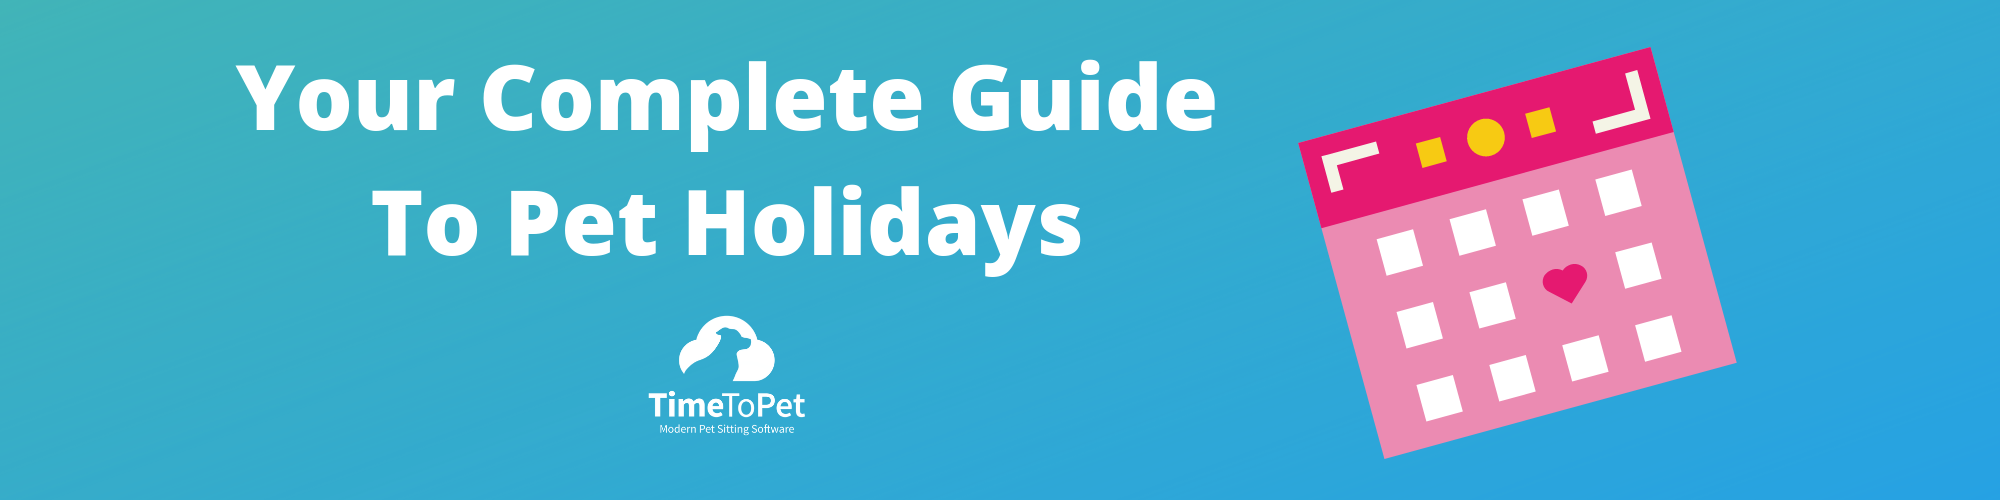 You-complete-guide-to-pet-holidays